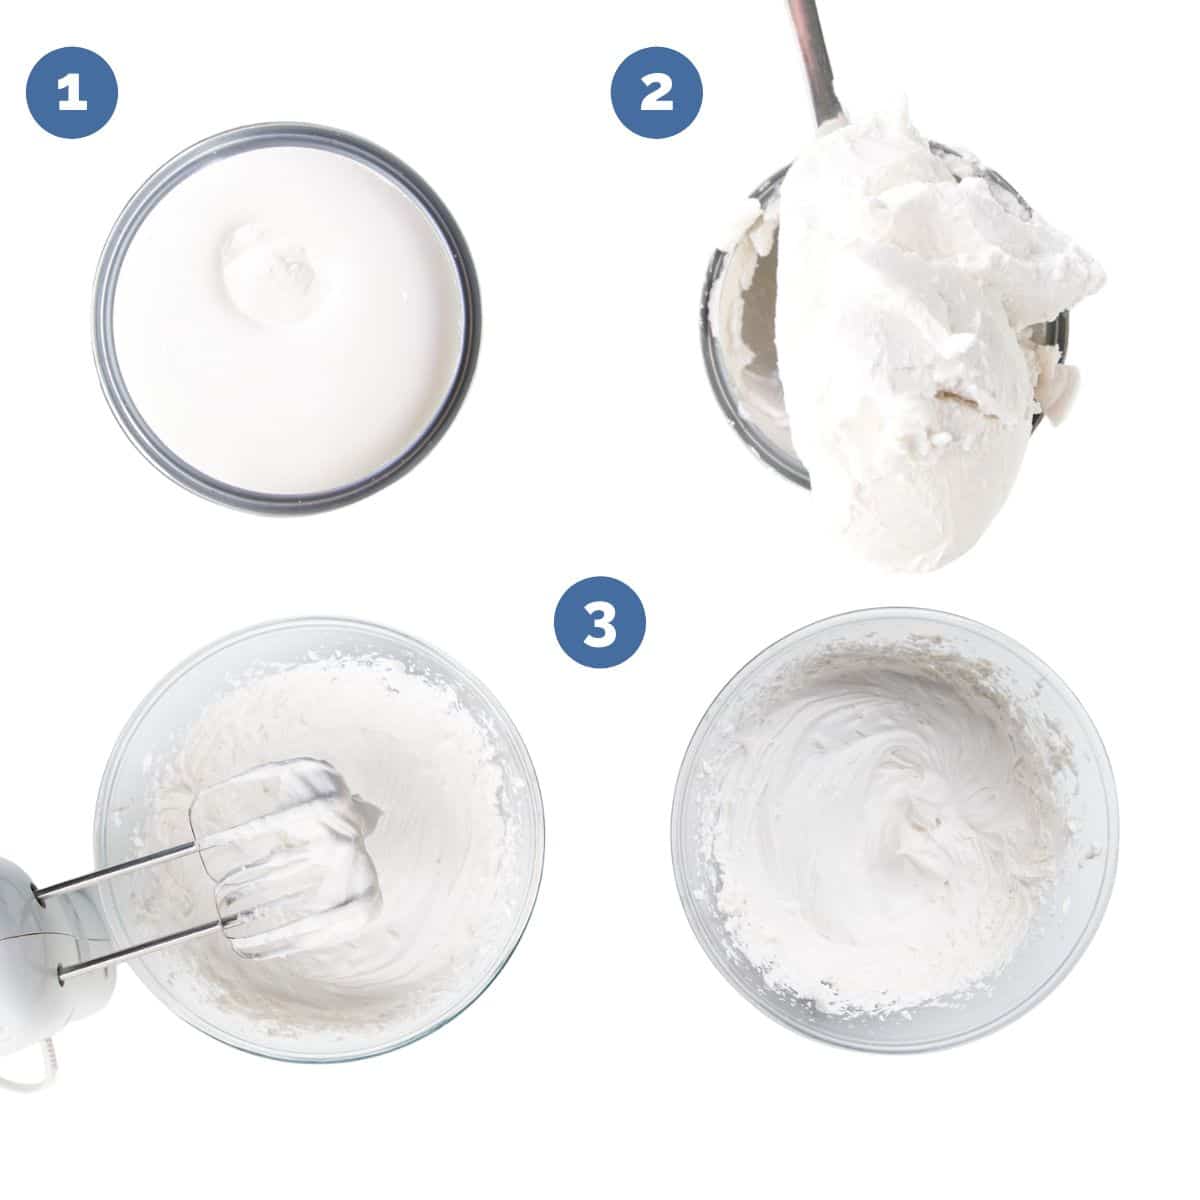 Collage of 4 Images Showing How to Make Whipped Coconut Cream. 1) Cocount Milk in Can after Refrigeration 2) Coconut Cream Scooped From Can 3) Coconut Cream Being Whipped 4)Coconut Cream Whipped in Bowl. 